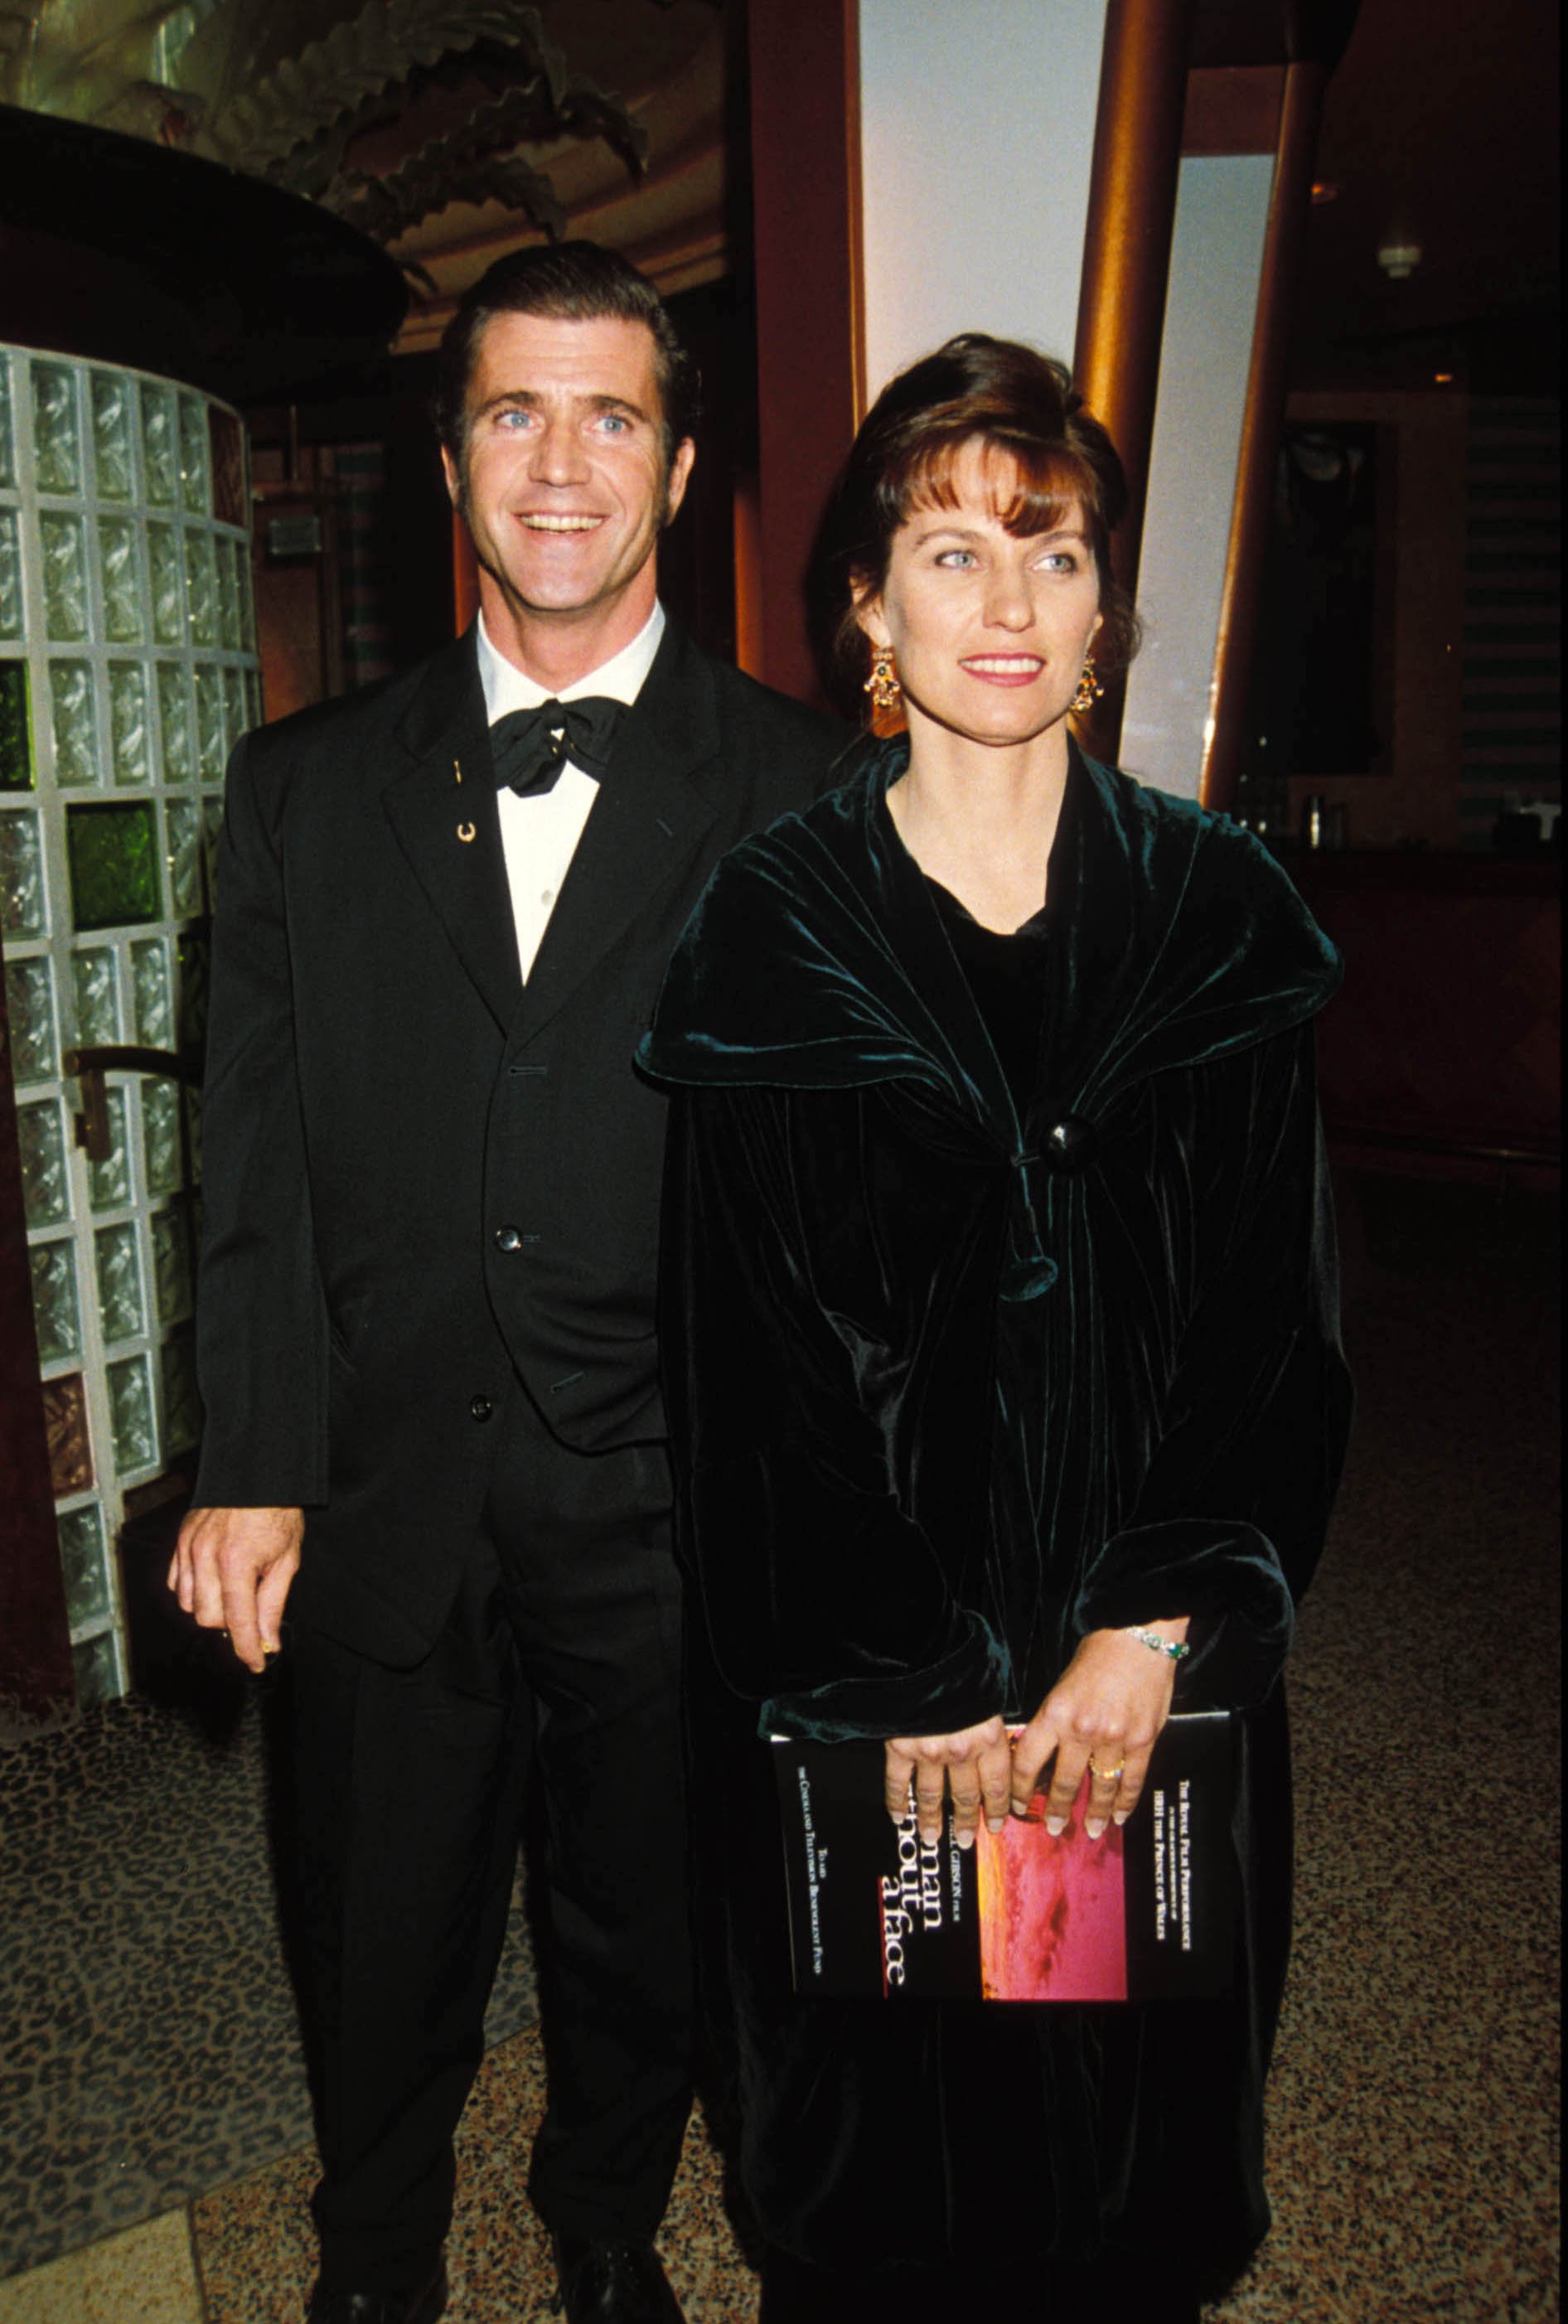 Mel Gibson with television personality Robyn Moore, during the "Man Without A Face" premiere party. / Source: Getty Images